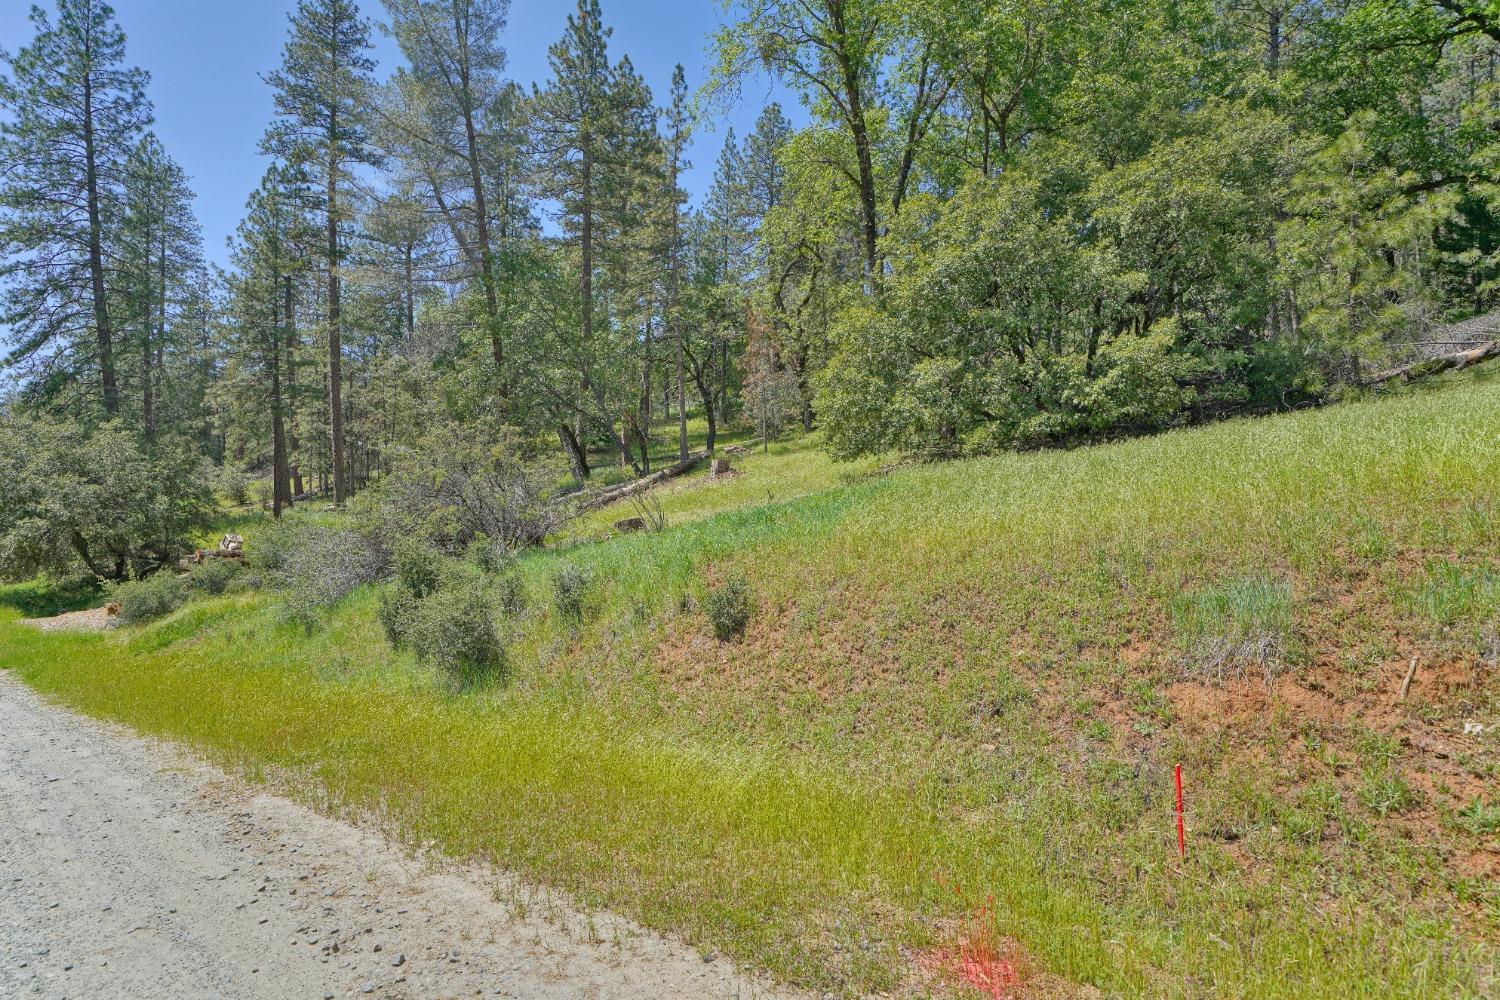 Located in the small Gold Strike subdivision on RED DOG DR in beautiful Camino. Thinking of building a home and want a peaceful setting?  Just minutes to Apple Hill without the traffic, 15 minutes to Placerville, minutes to many award winning wineries and about 1 hour to Tahoe! Banner Bank in Folsom offers vacant land loans!